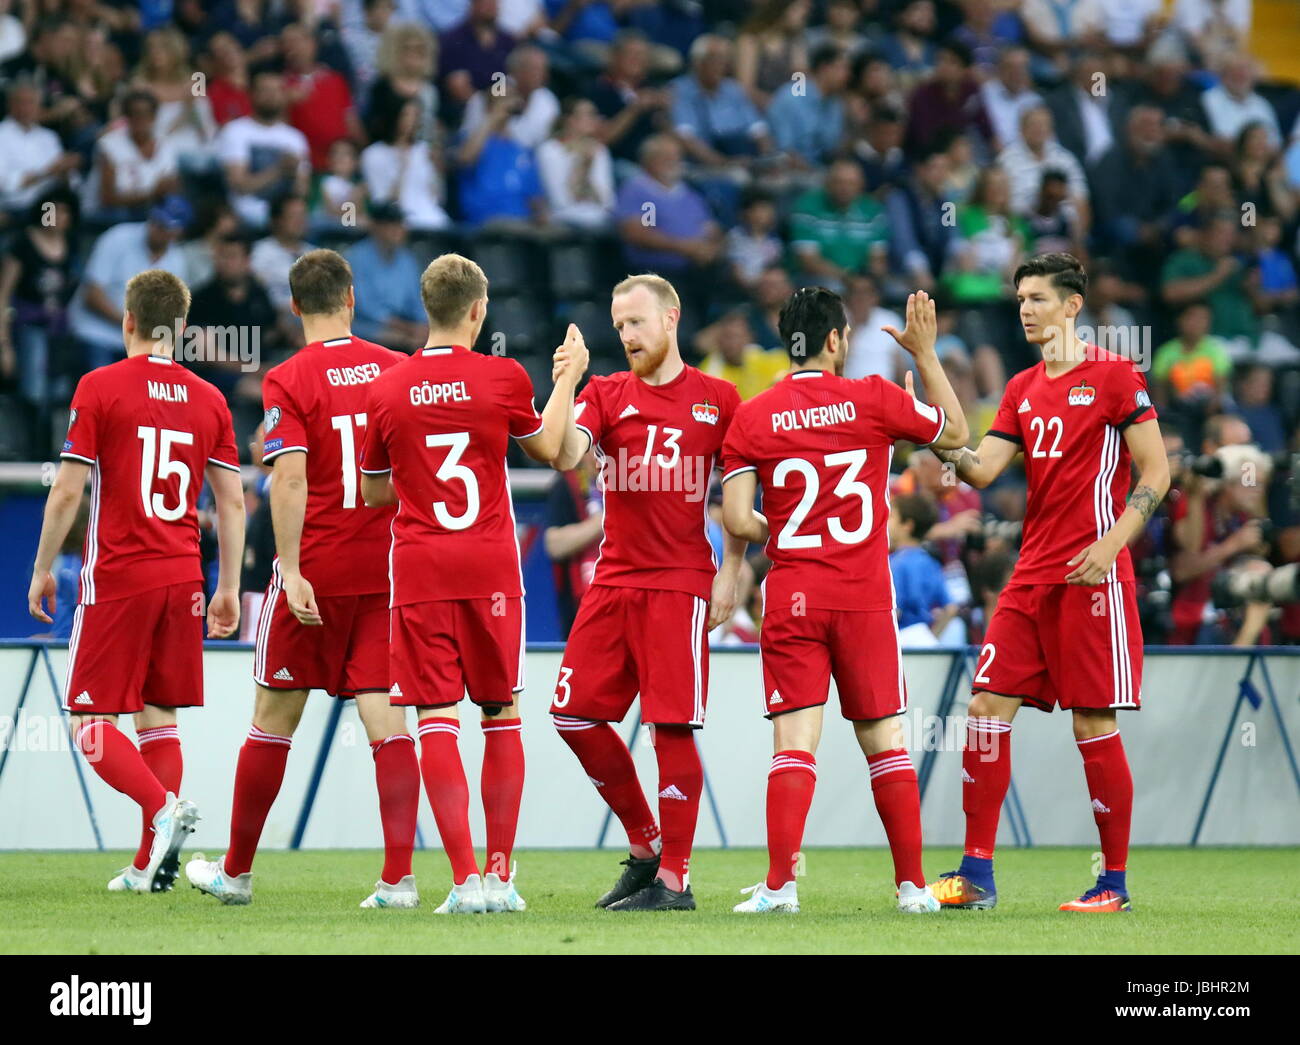 Udine, Friuli Venezia Giulia. 11th June, 2017. ITALY, Udine: Liechtenstein's midfielder Martin Buchel (C) with his teammates during of the FIFA World Cup 2018 qualification football match between Italy and Liechtenstein at Dacia Arena Stadium on 11th June, 2017. Credit: Andrea Spinelli/Alamy Live News Stock Photo